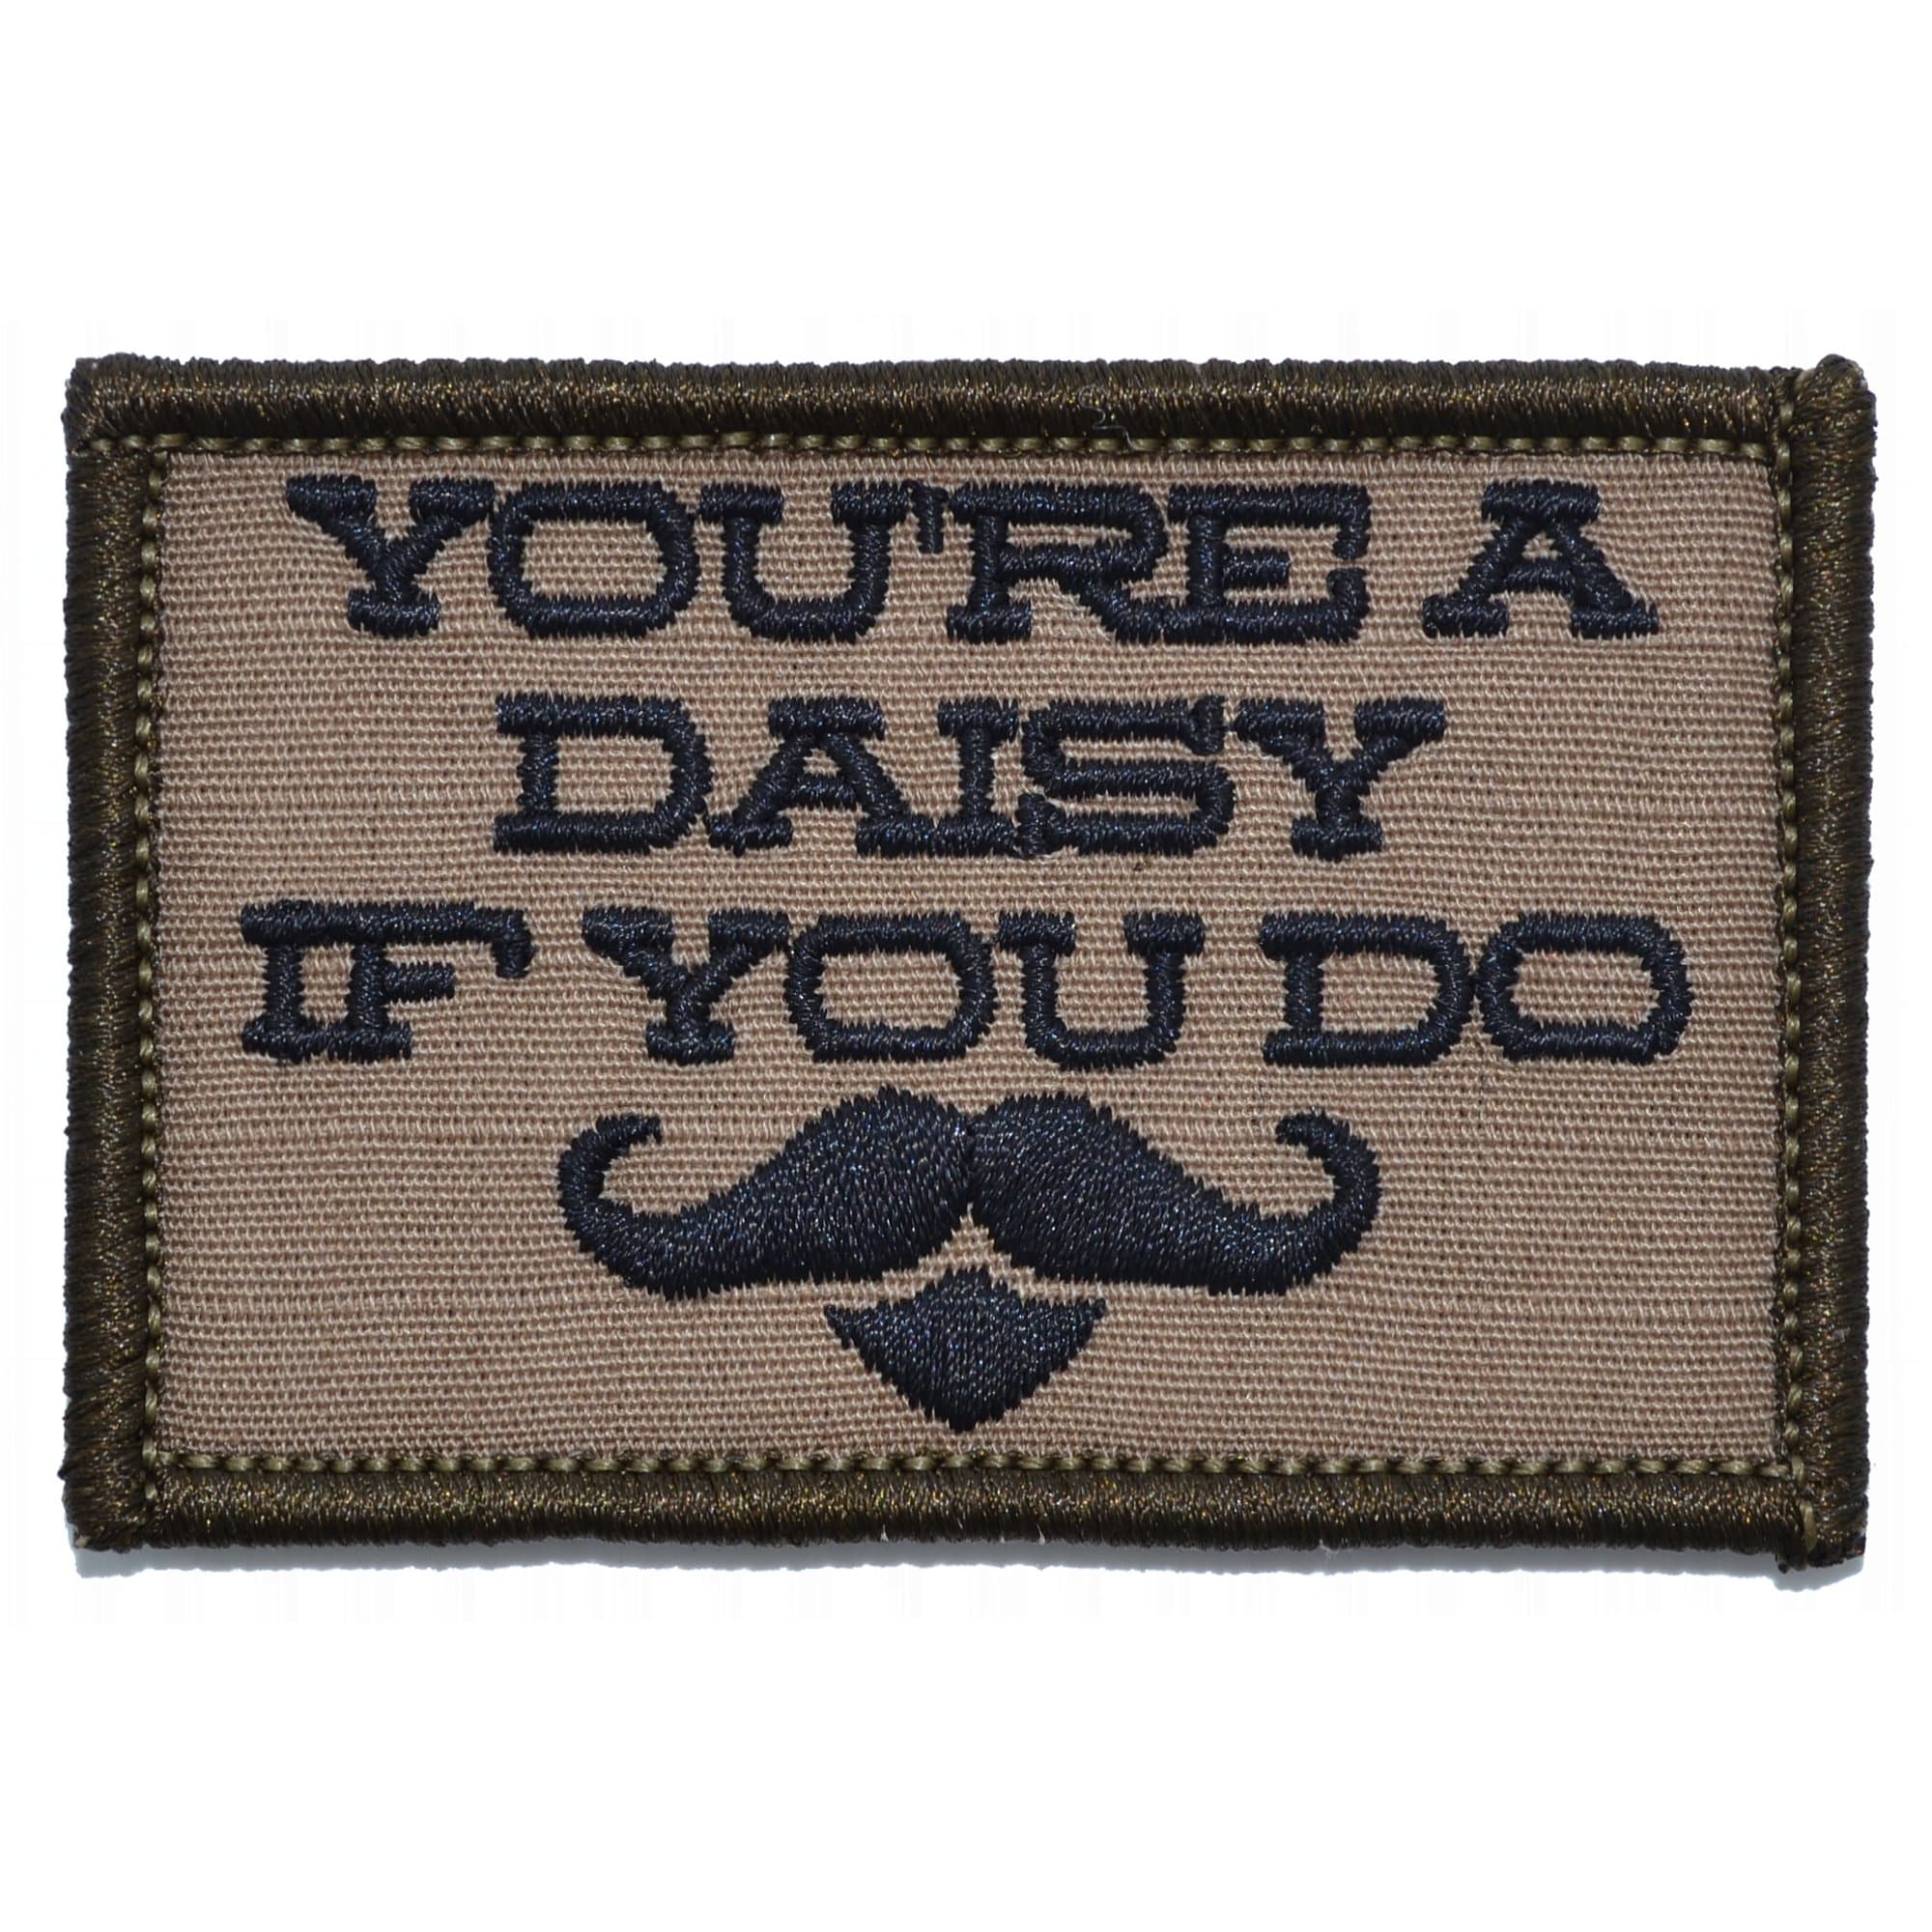 Tactical Gear Junkie Patches Coyote Brown w/ Black You're A Daisy If You Do, Doc Holiday Quote - 2x3 Patch